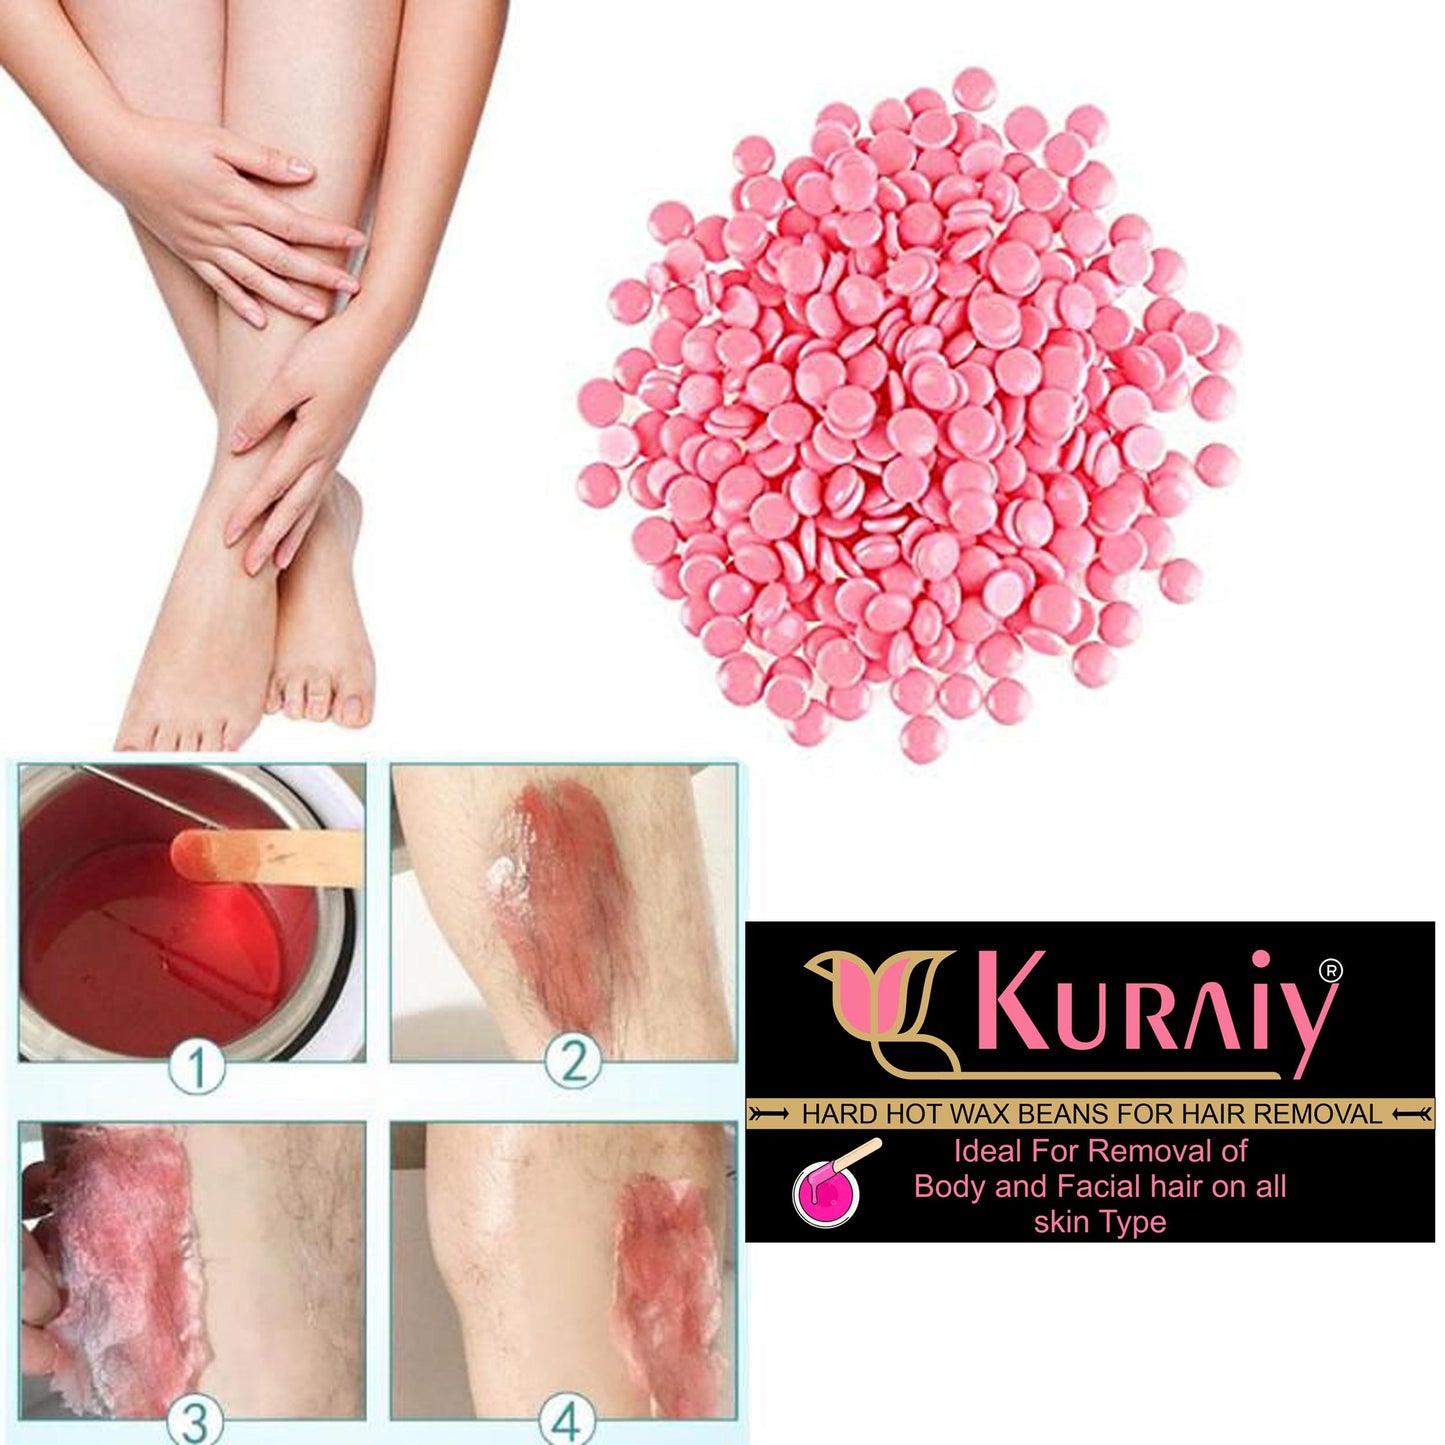 KURAIY� Hair Removal Hot Hard Body Wax Beans (50Gm) for Face, Arm, Legs, Bum and whole Body For Men and Women Suitable for All Skin Types with Steel Spatula